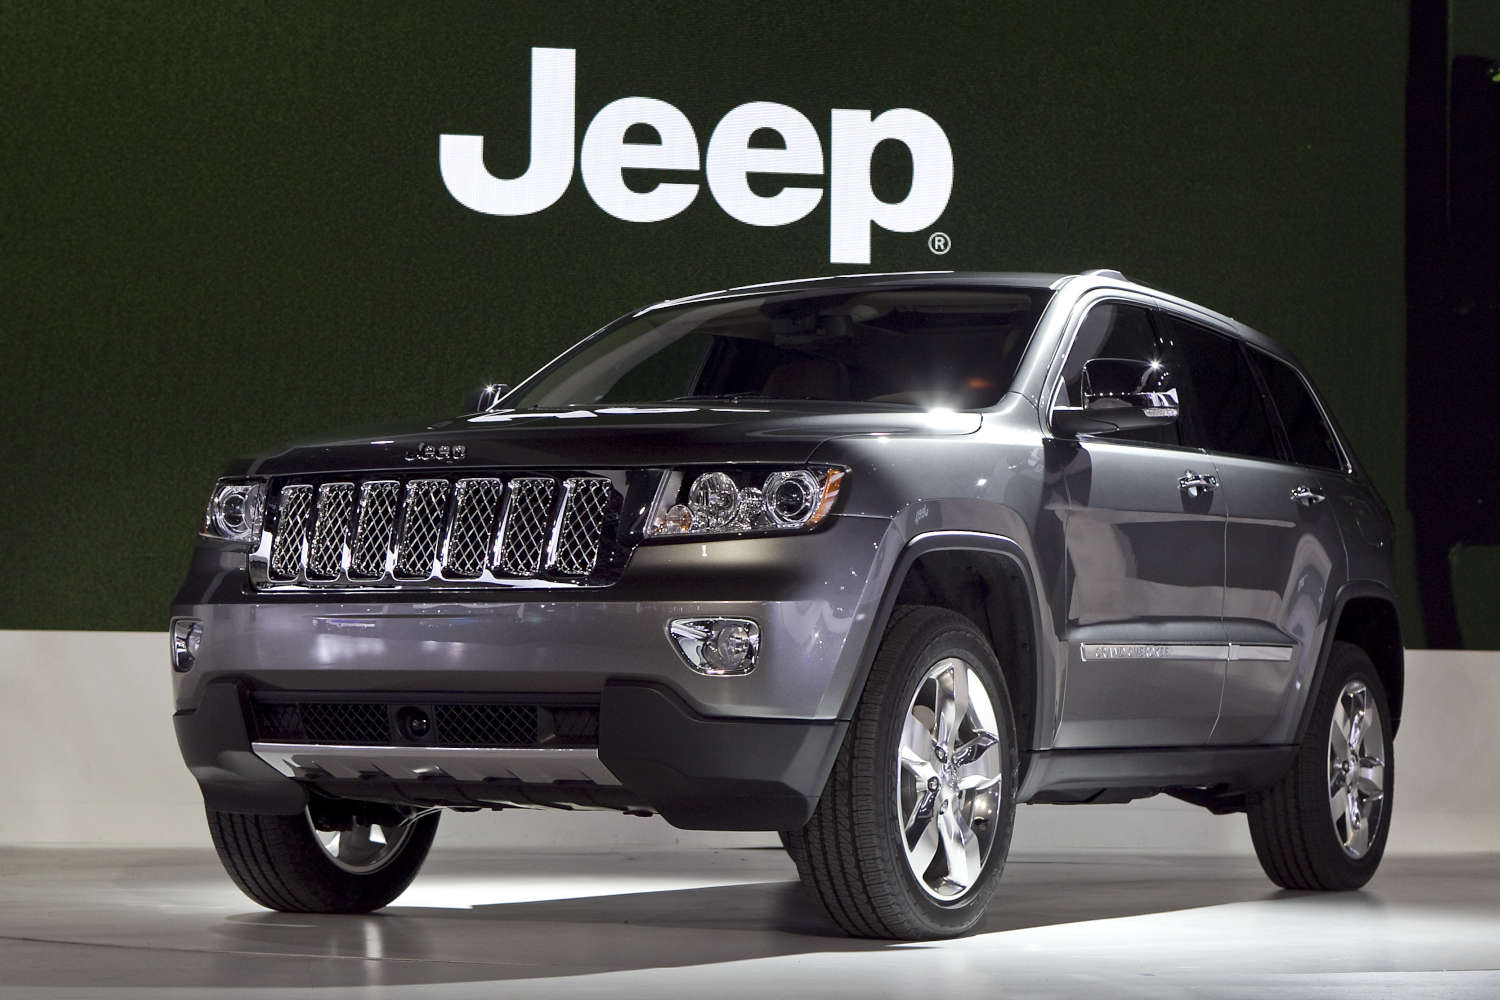 The 2011 Jeep Grand Cherokee in silver